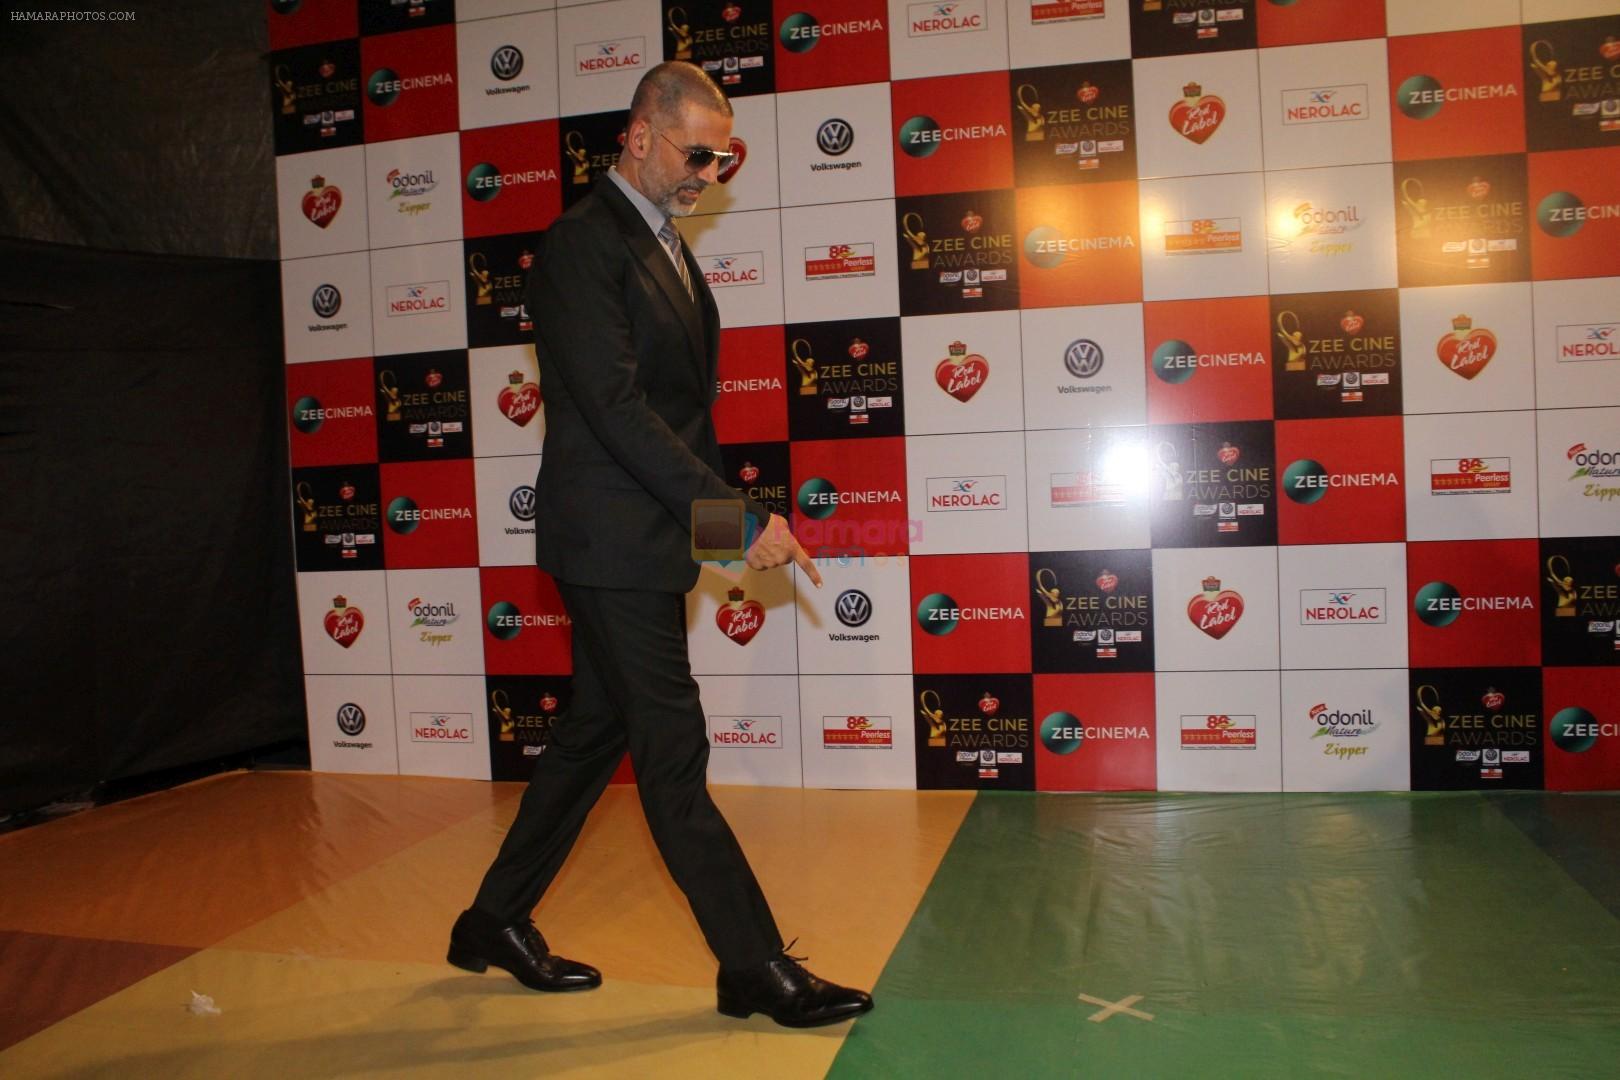 Akshay Kumar at the Red Carpet Event Of Zee Cine Awards 2018 on 19th Dec 2017